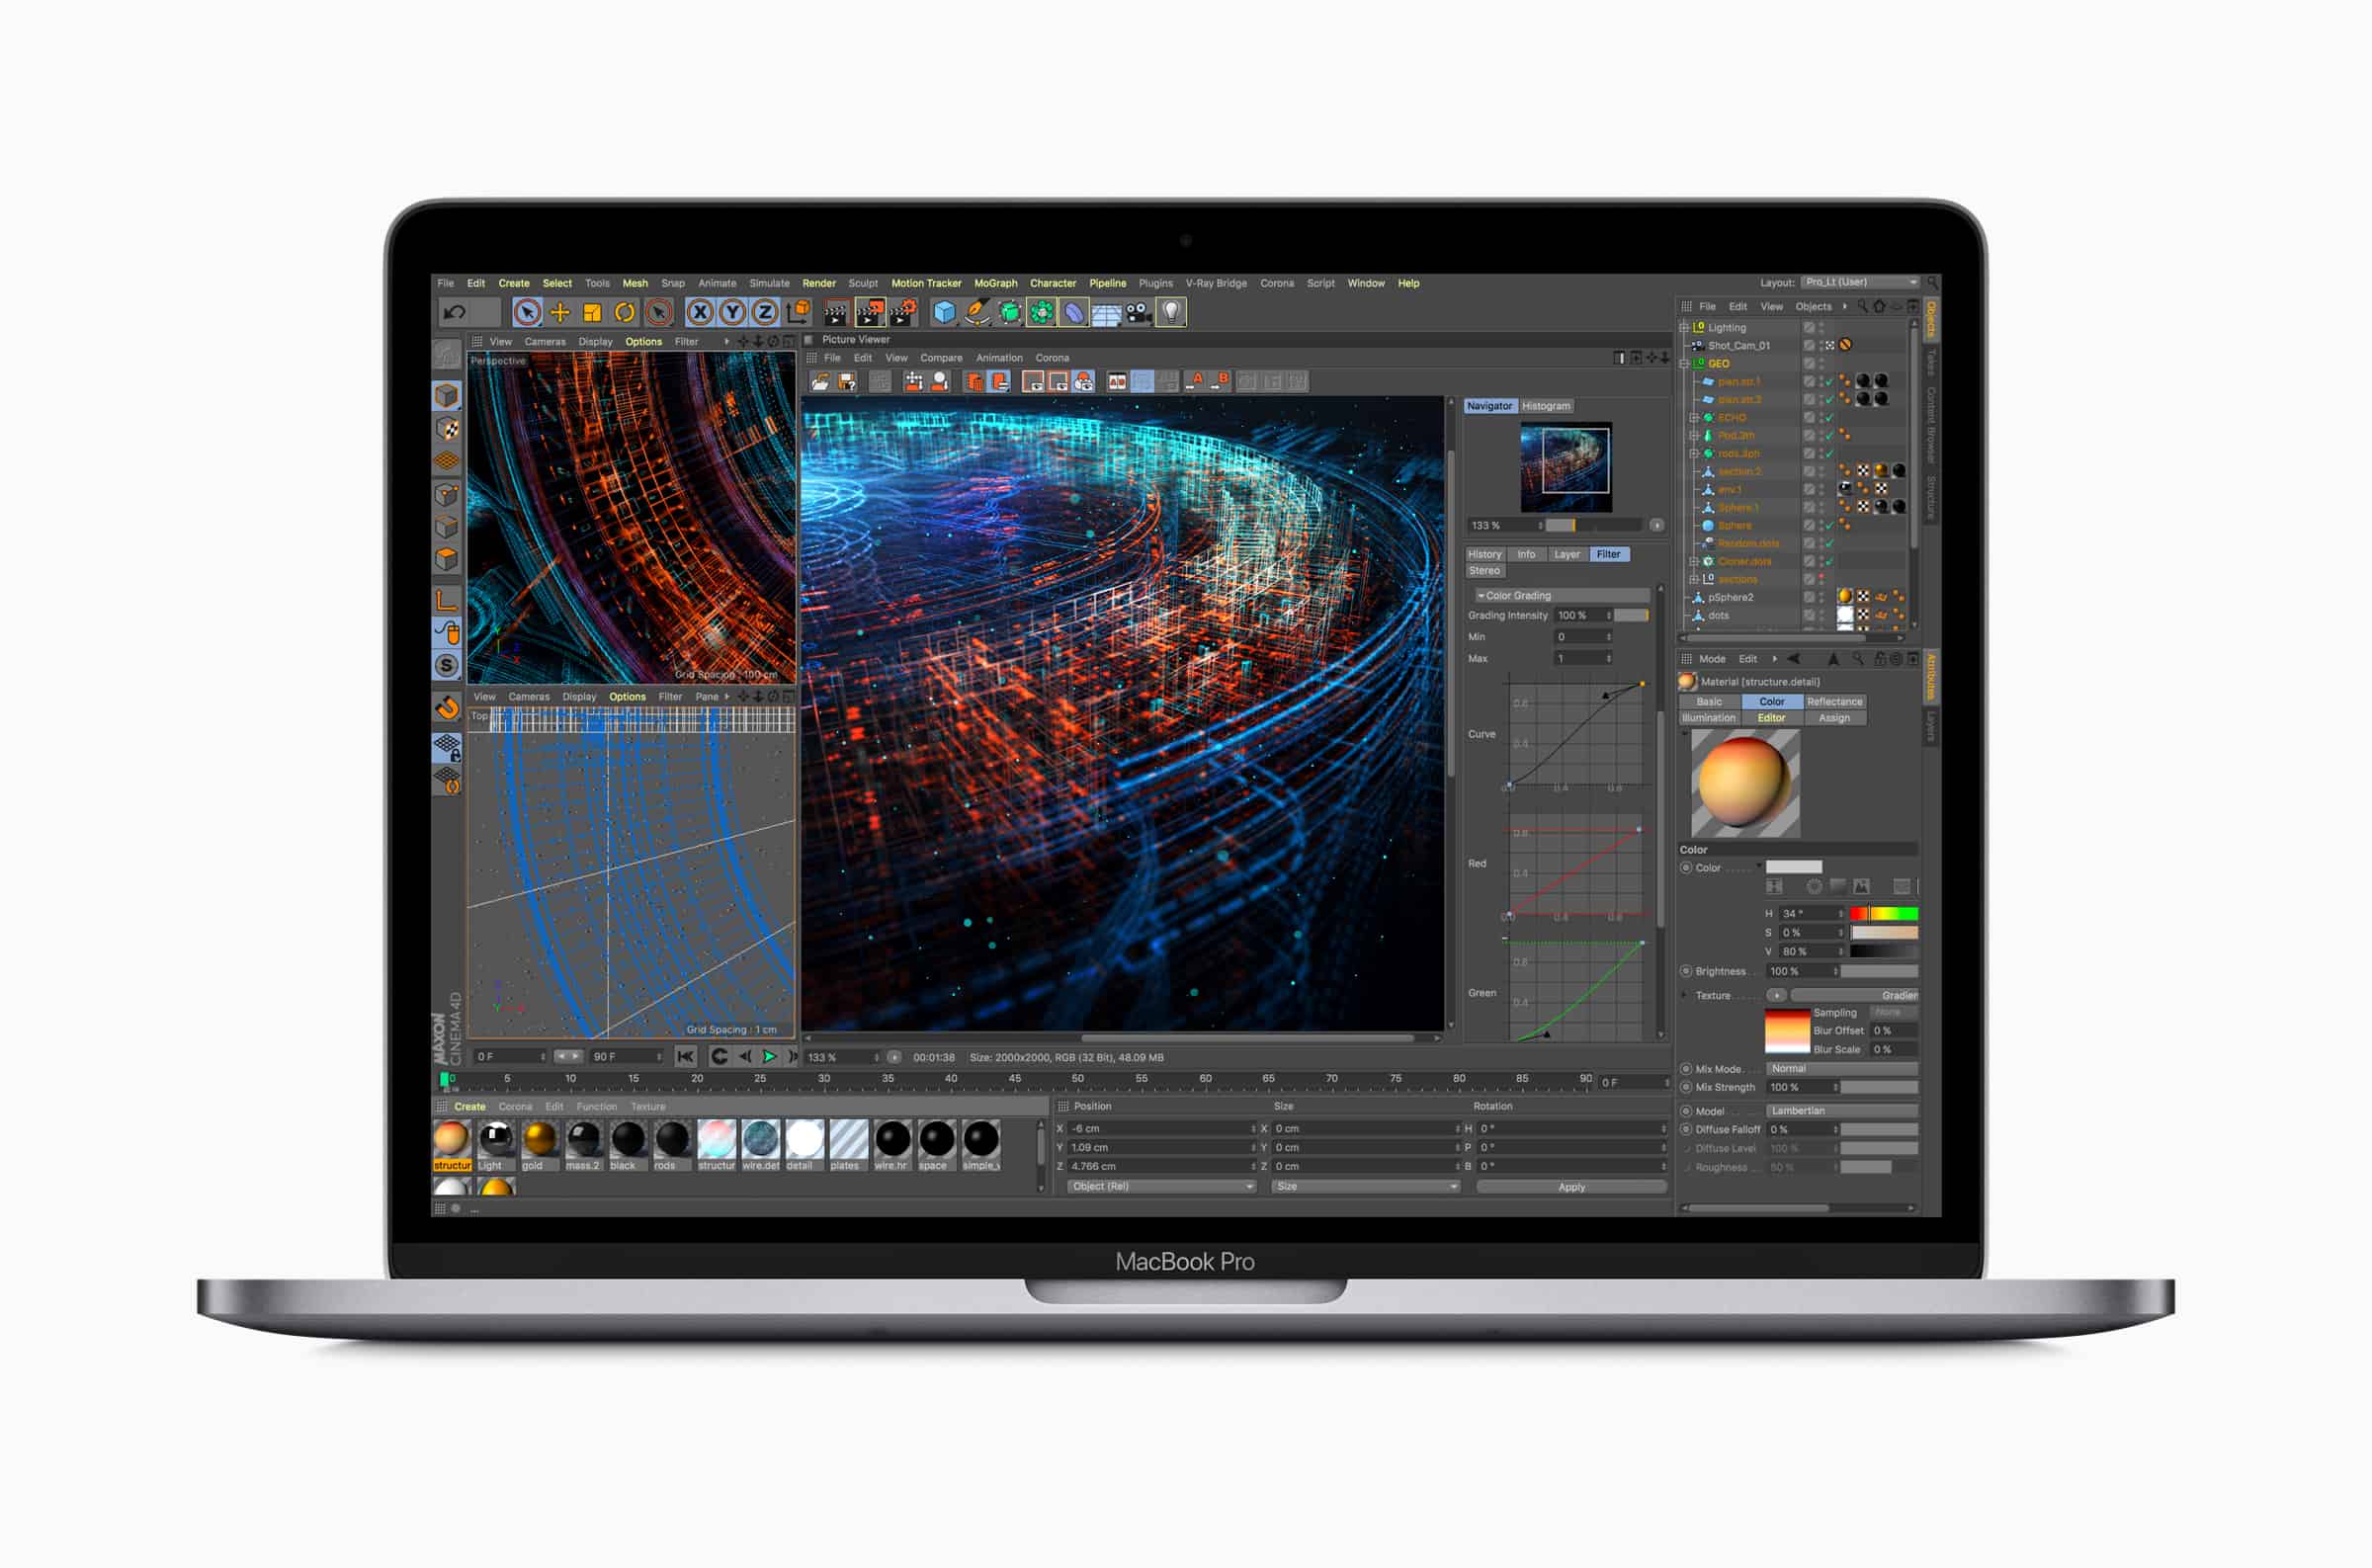 The new MacBook Pros bring "faster performance for complex simulations and data manipulation," Apple says.